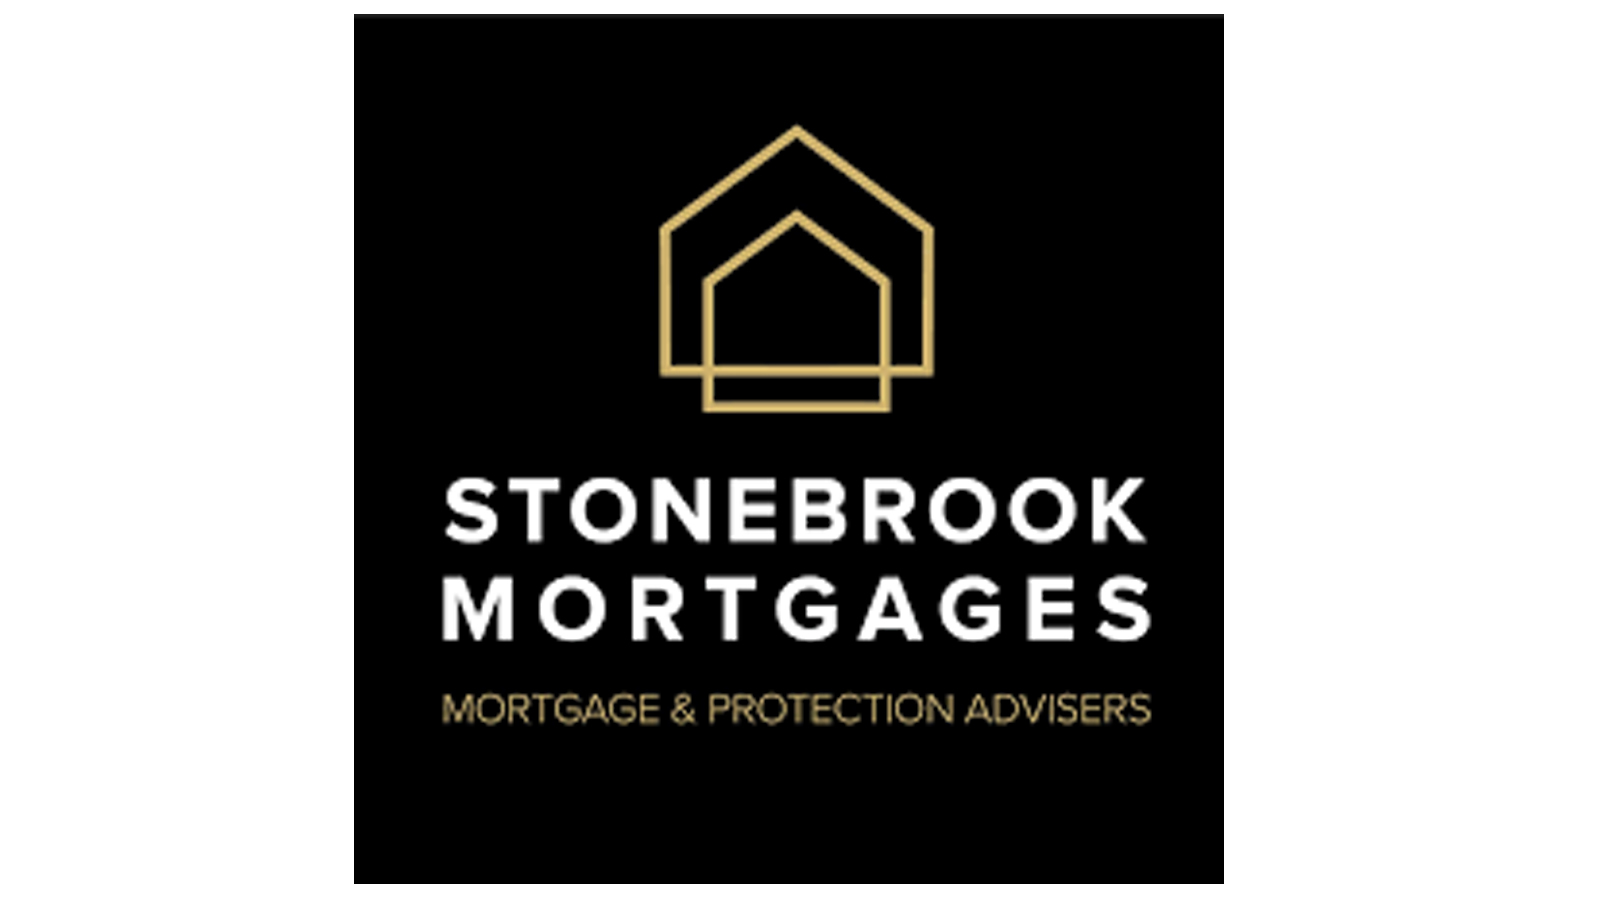 Stonebrook Mortgages